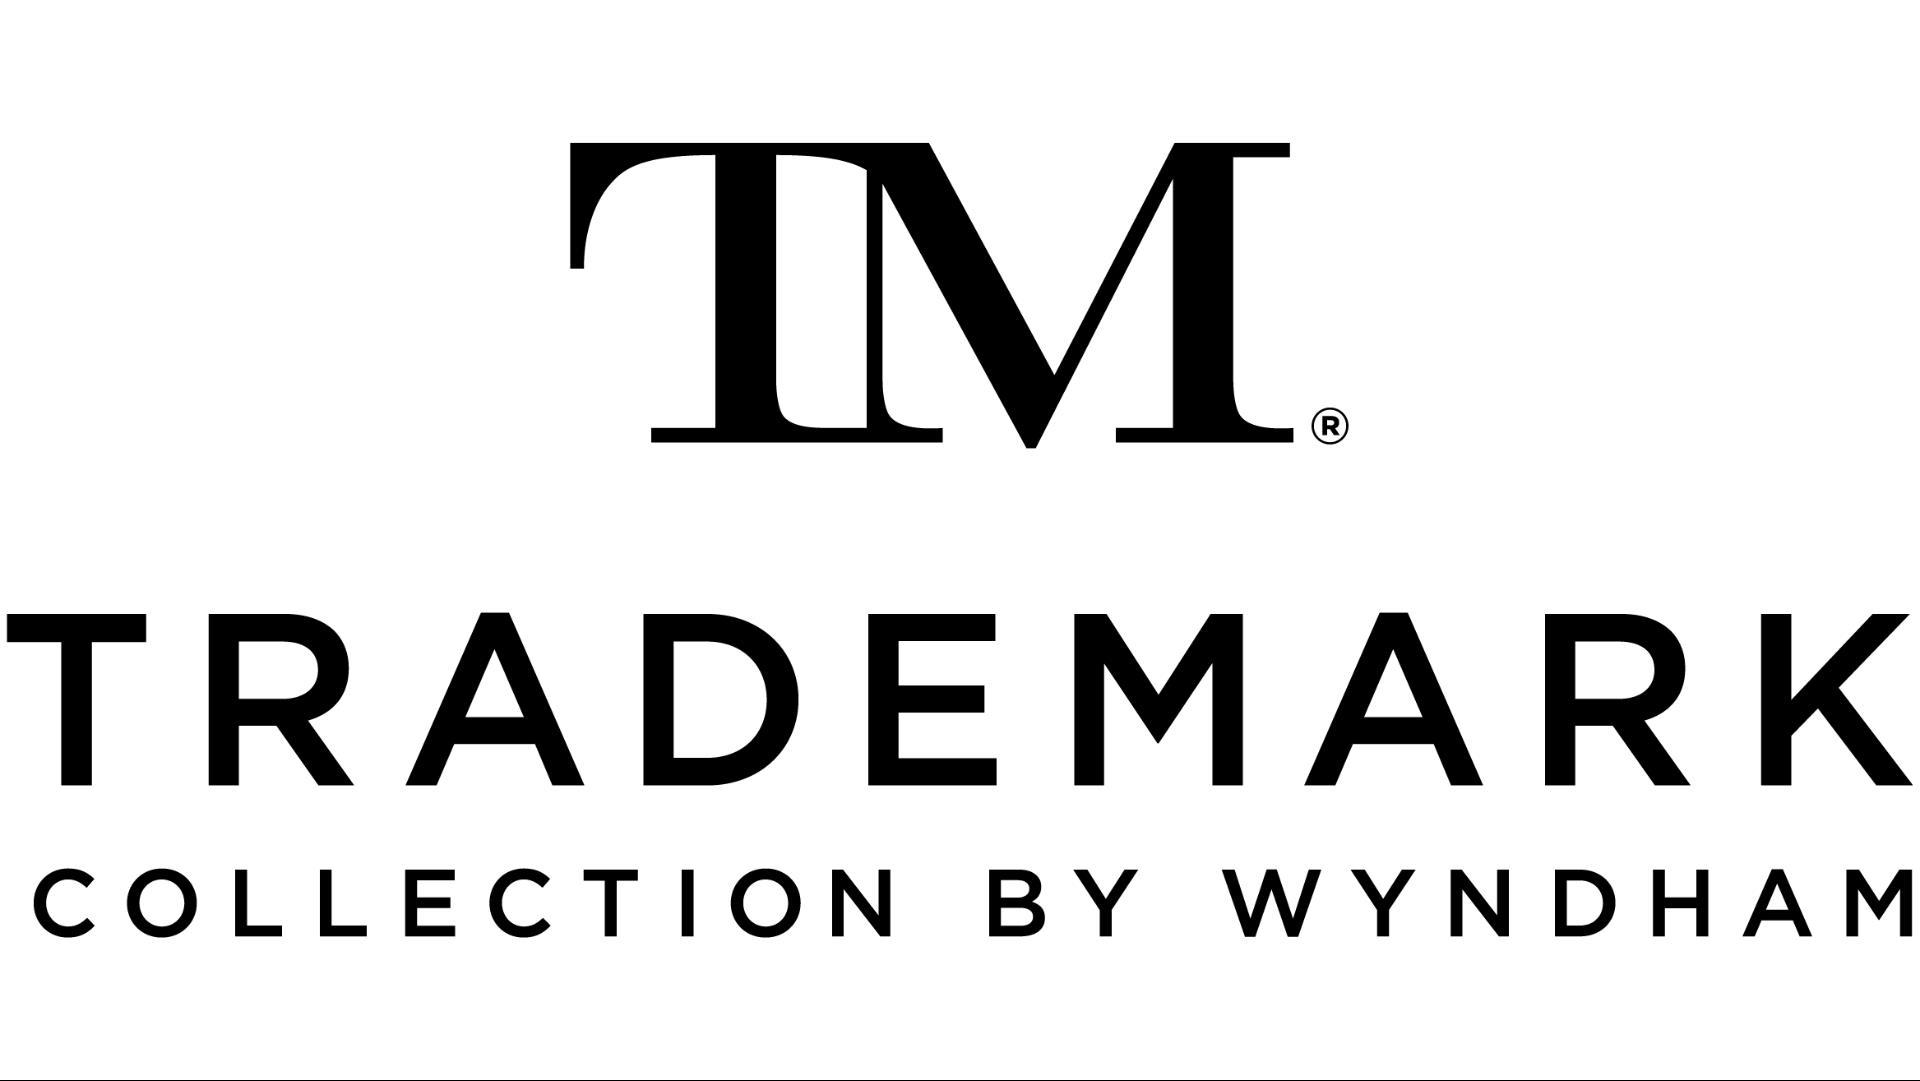 Majestic Hotel South Beach, Trademark Collection by Wyndham in Miami Beach, FL